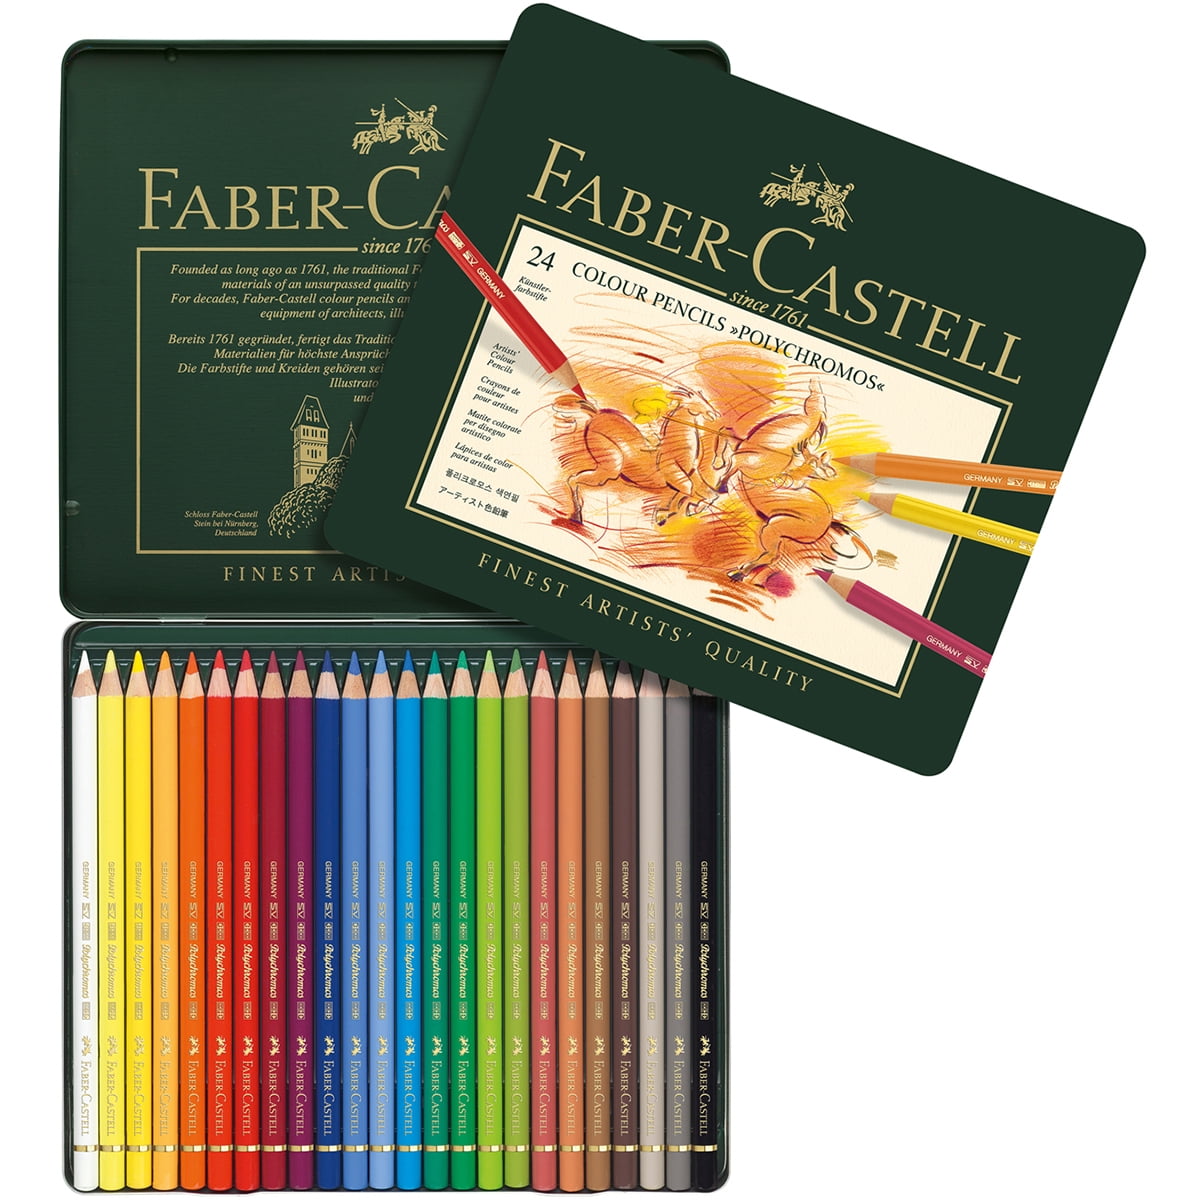 Faber-Castell 24 Piece Polychromous Colored Pencil Set in Metal Tin